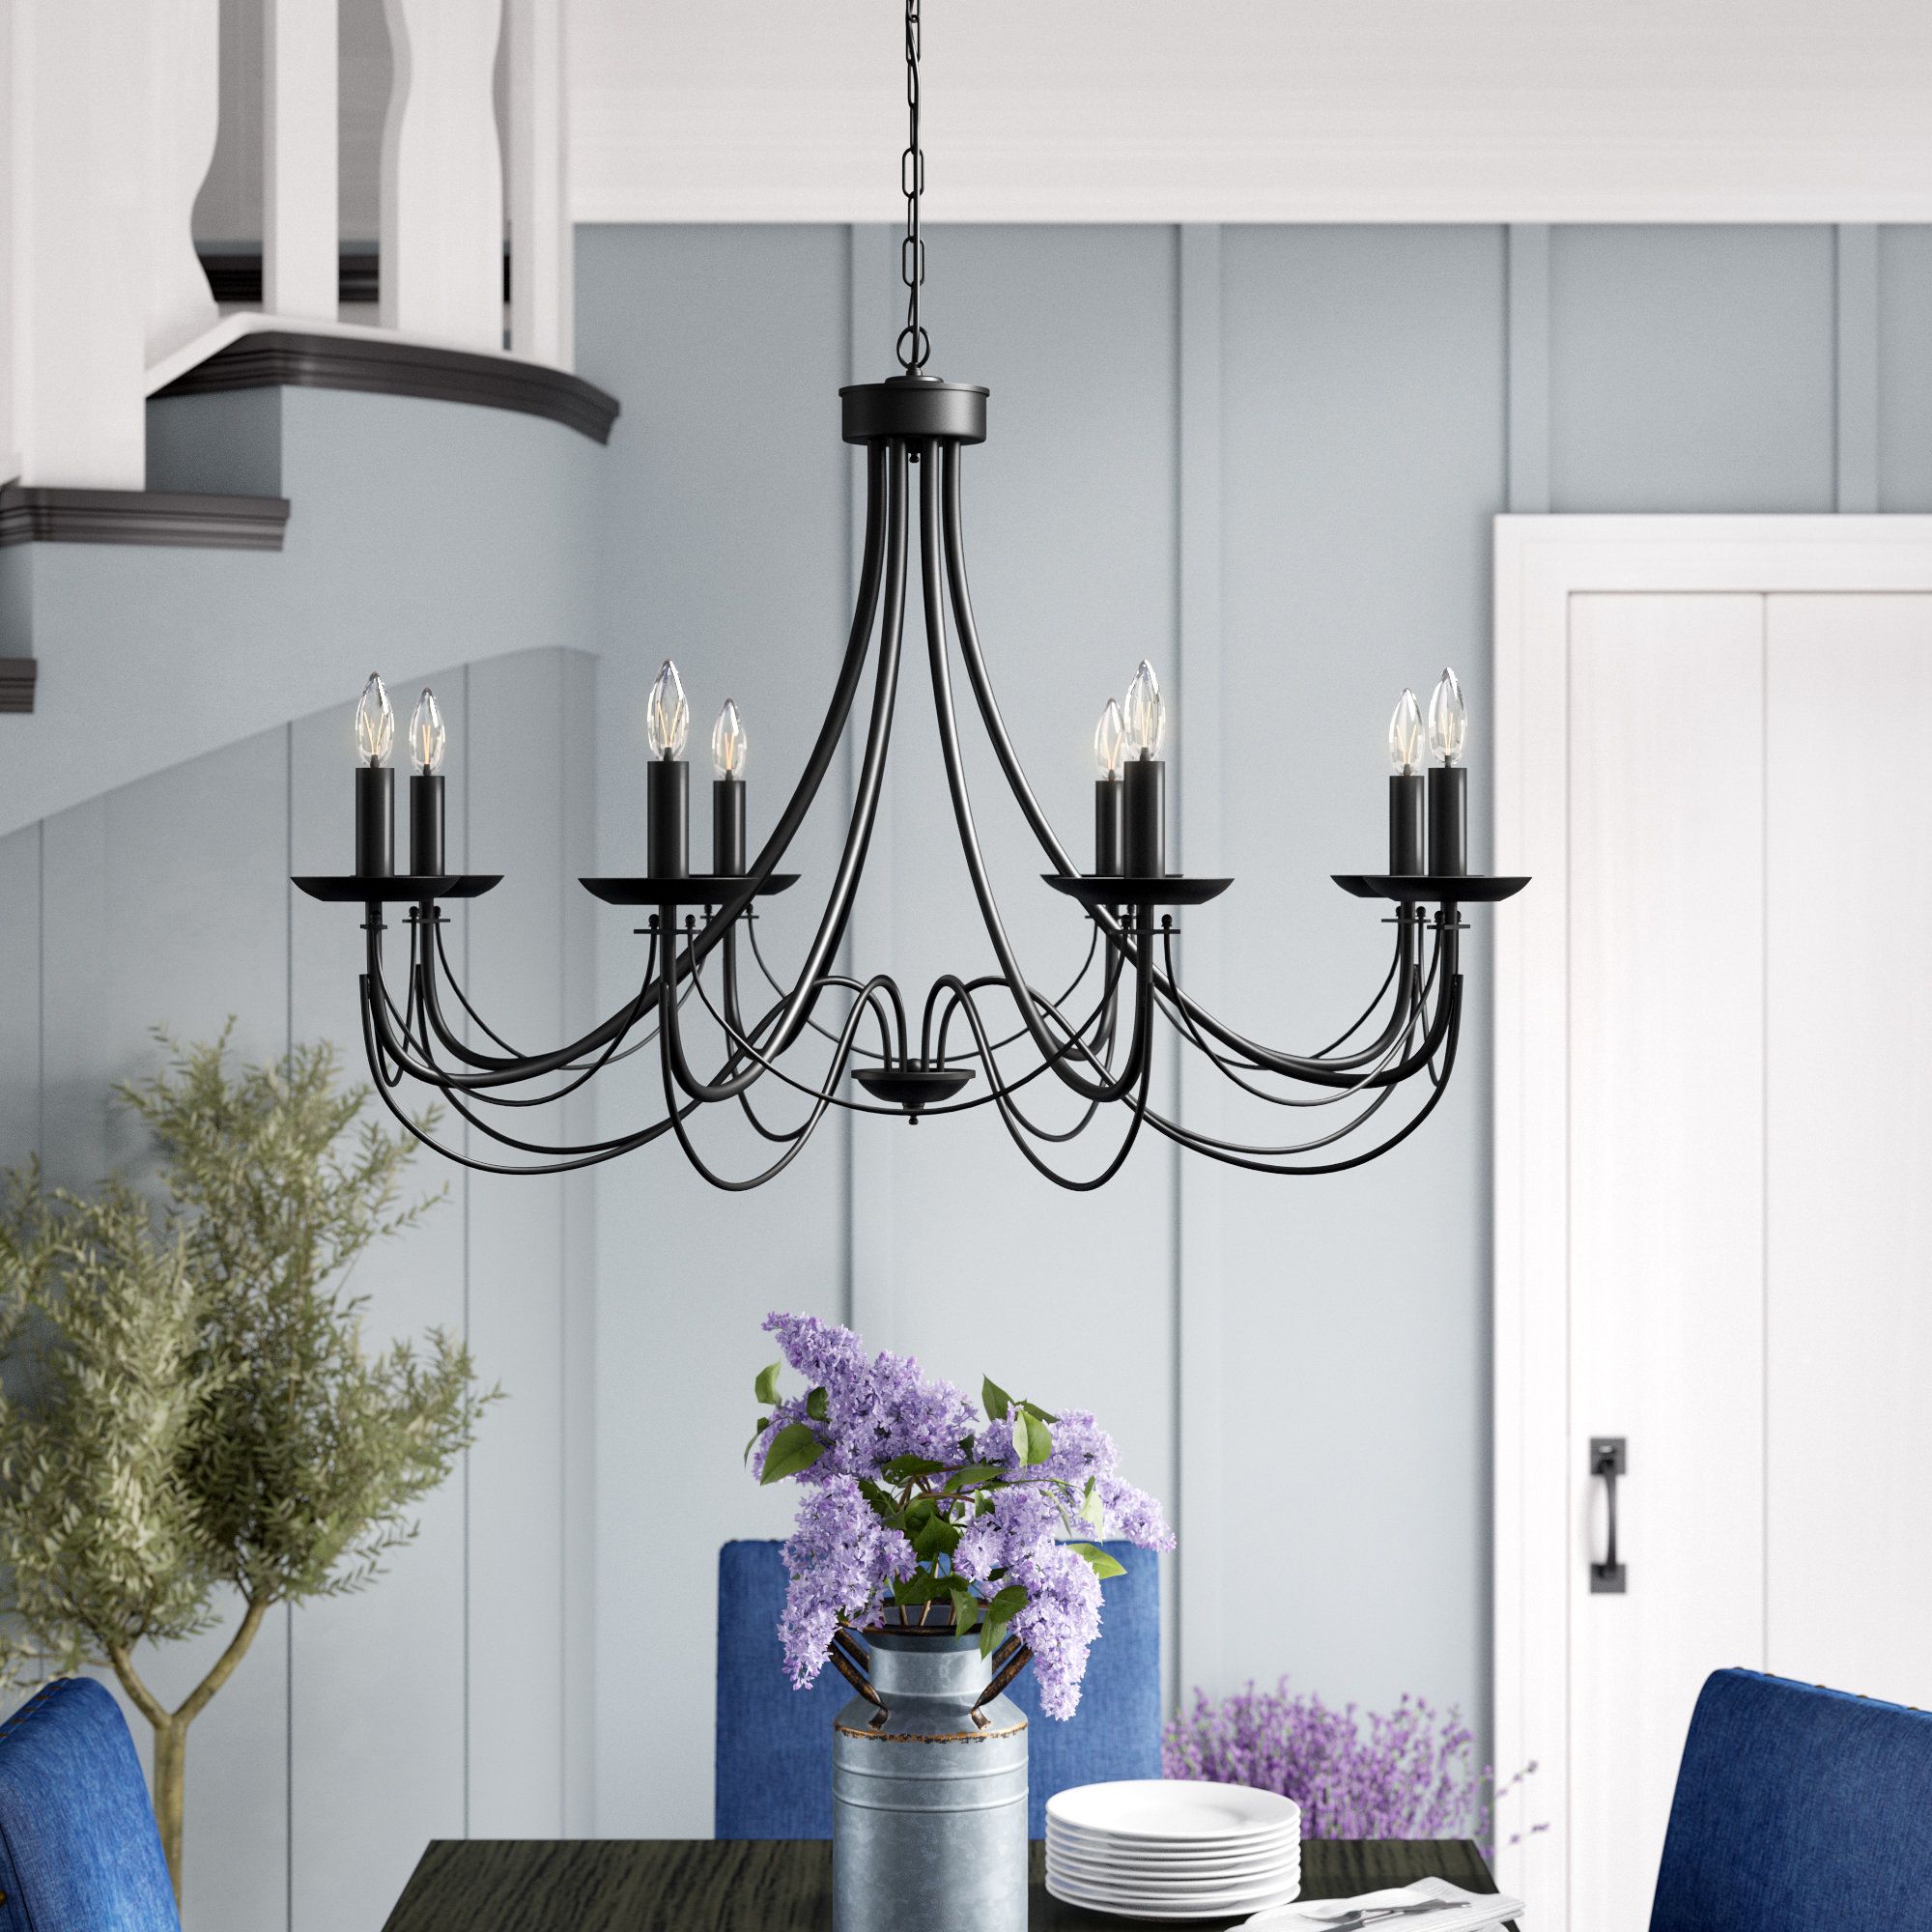 Ryckman Iron 8 Light Candle Style Chandelier Throughout Watford 6 Light Candle Style Chandeliers (View 20 of 30)